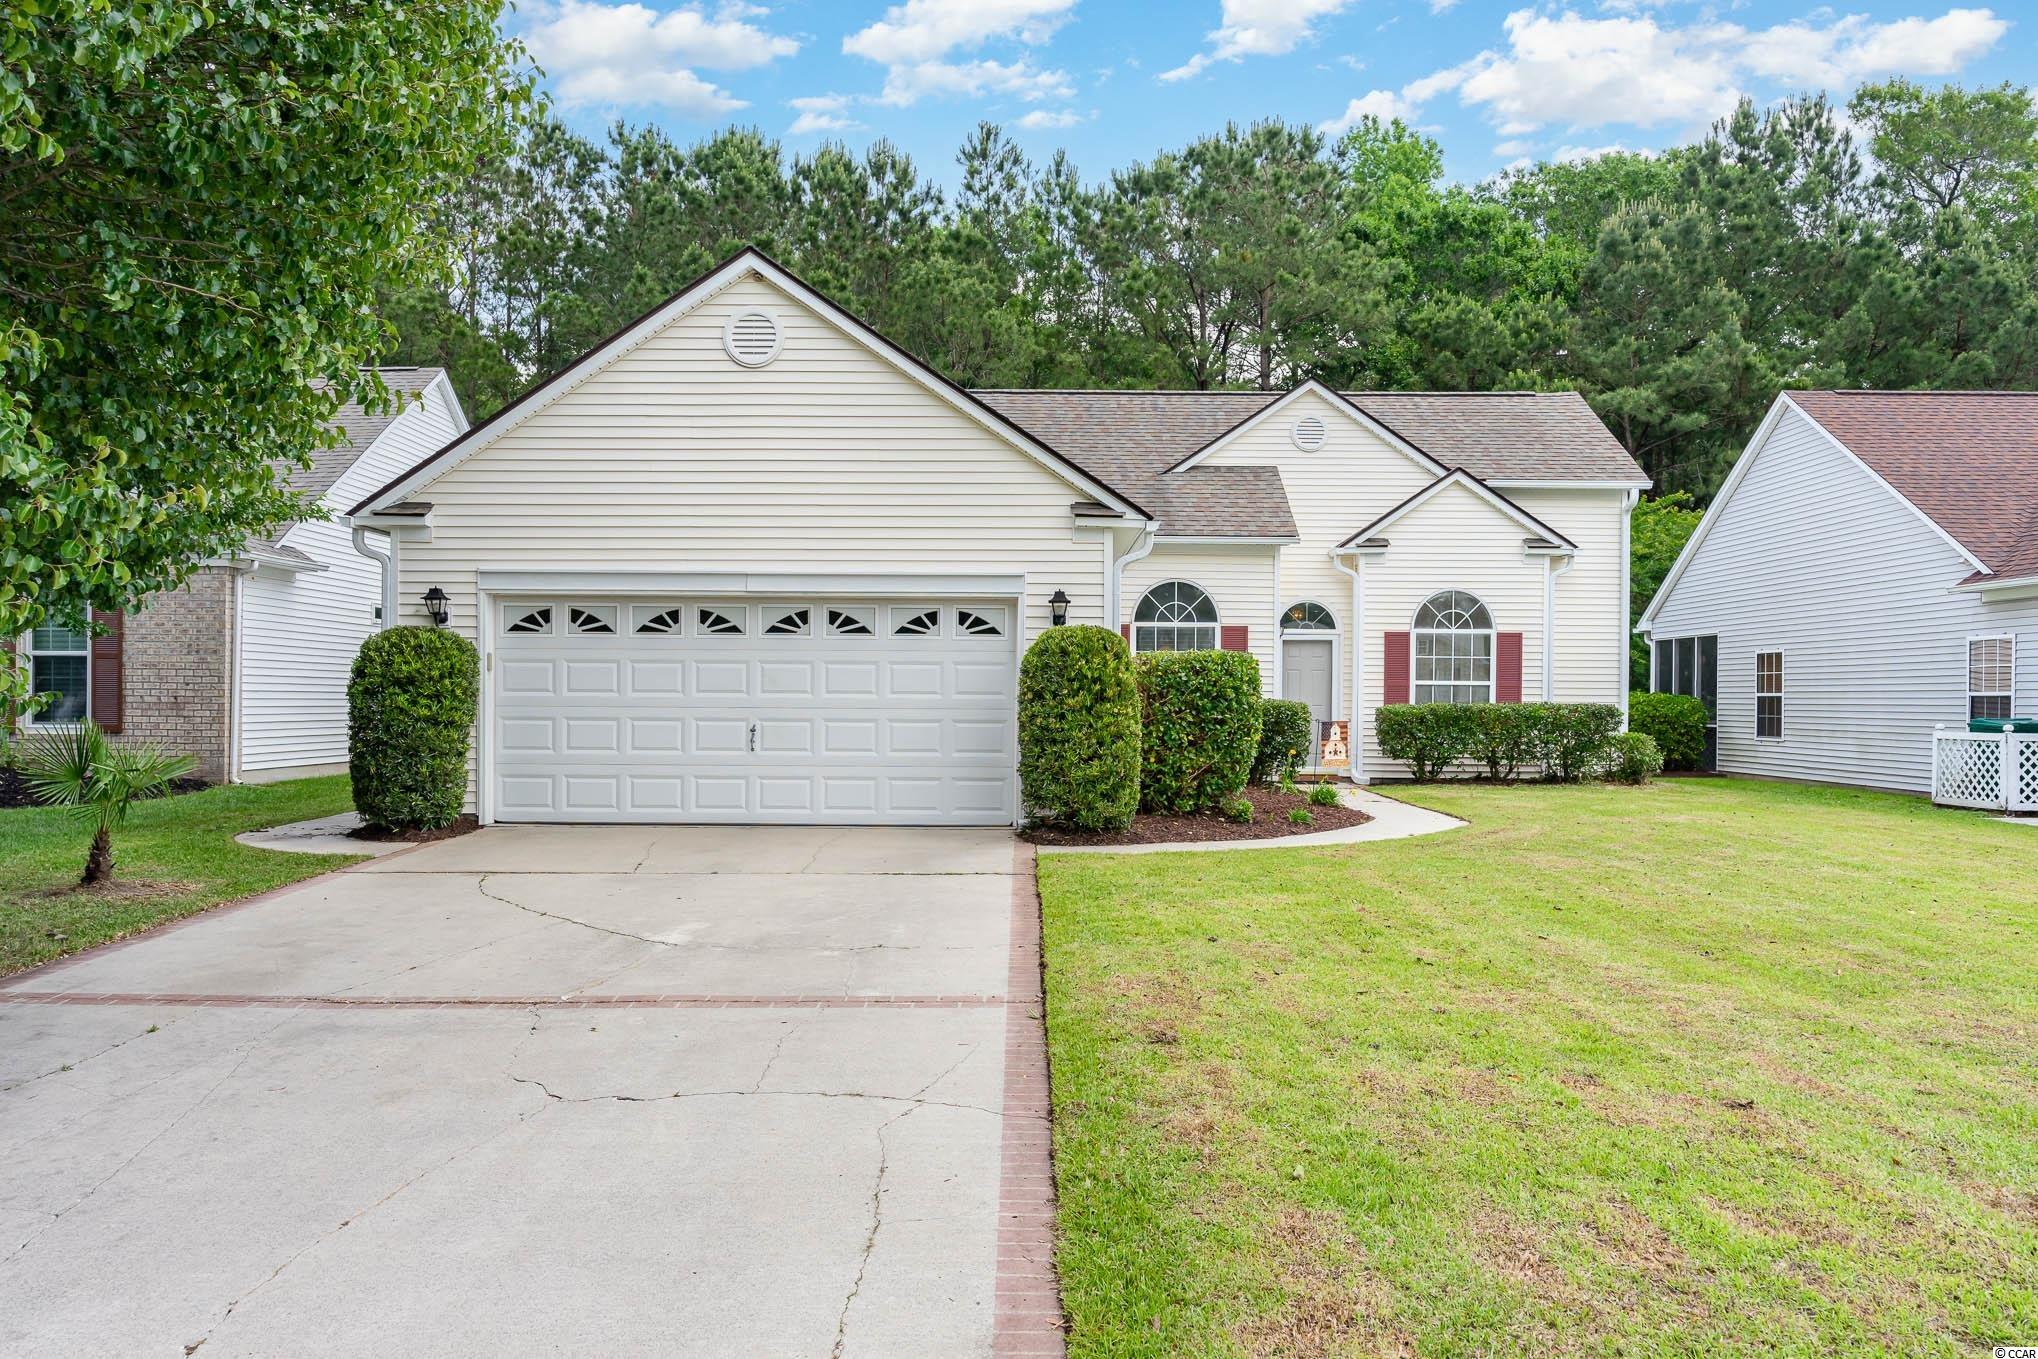 1460 Winged Foot Ct. Murrells Inlet, SC 29576